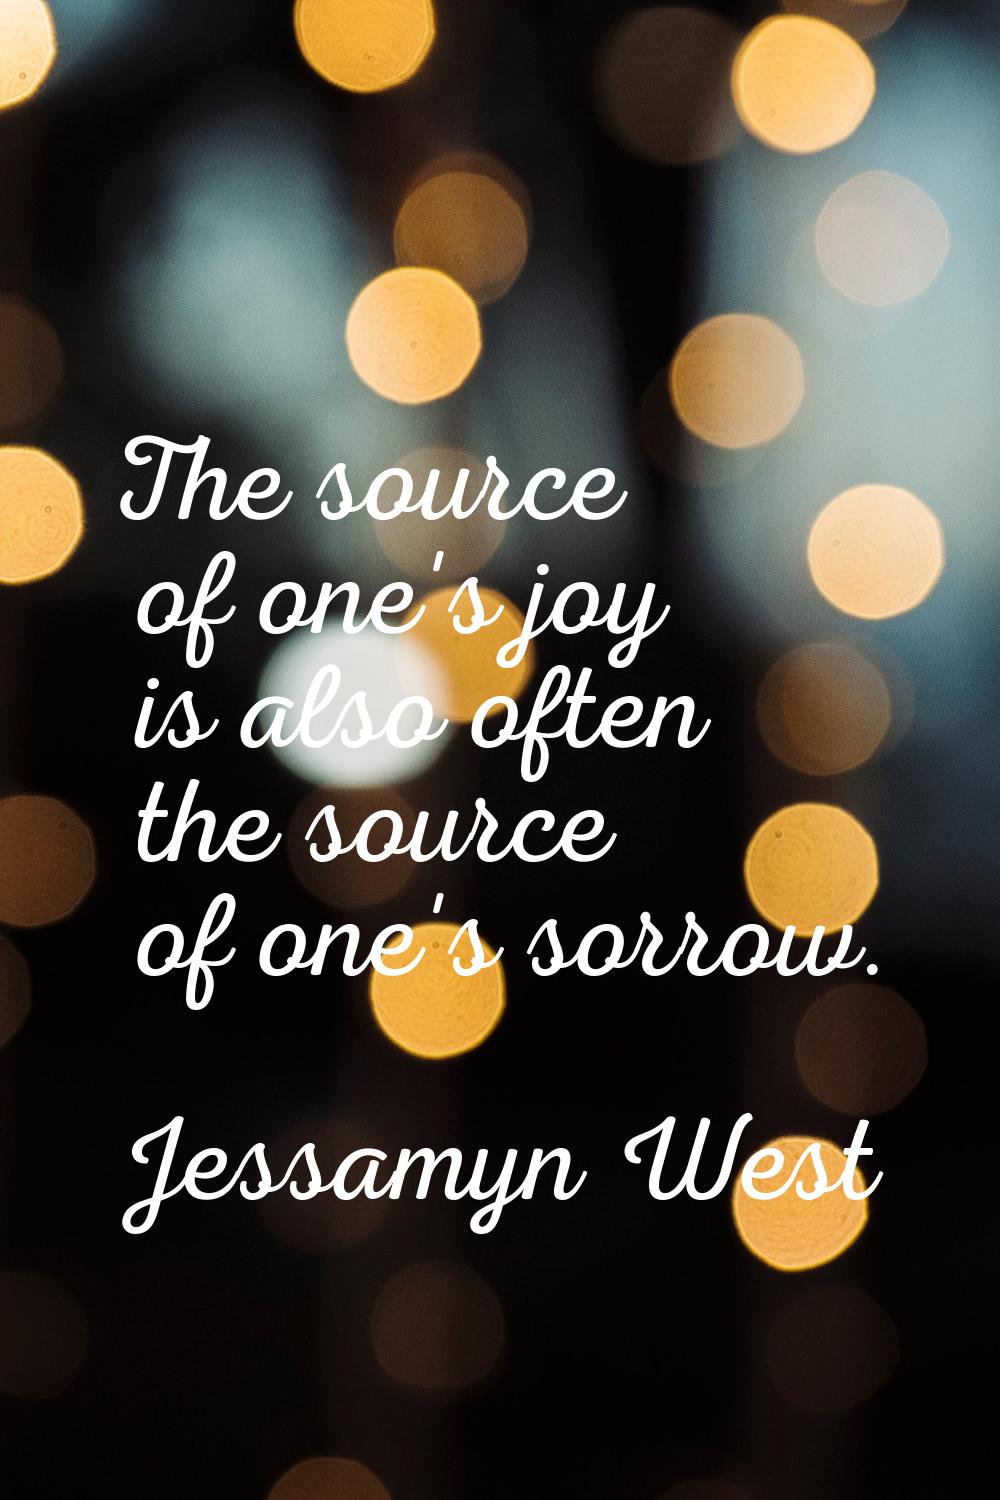 The source of one's joy is also often the source of one's sorrow.